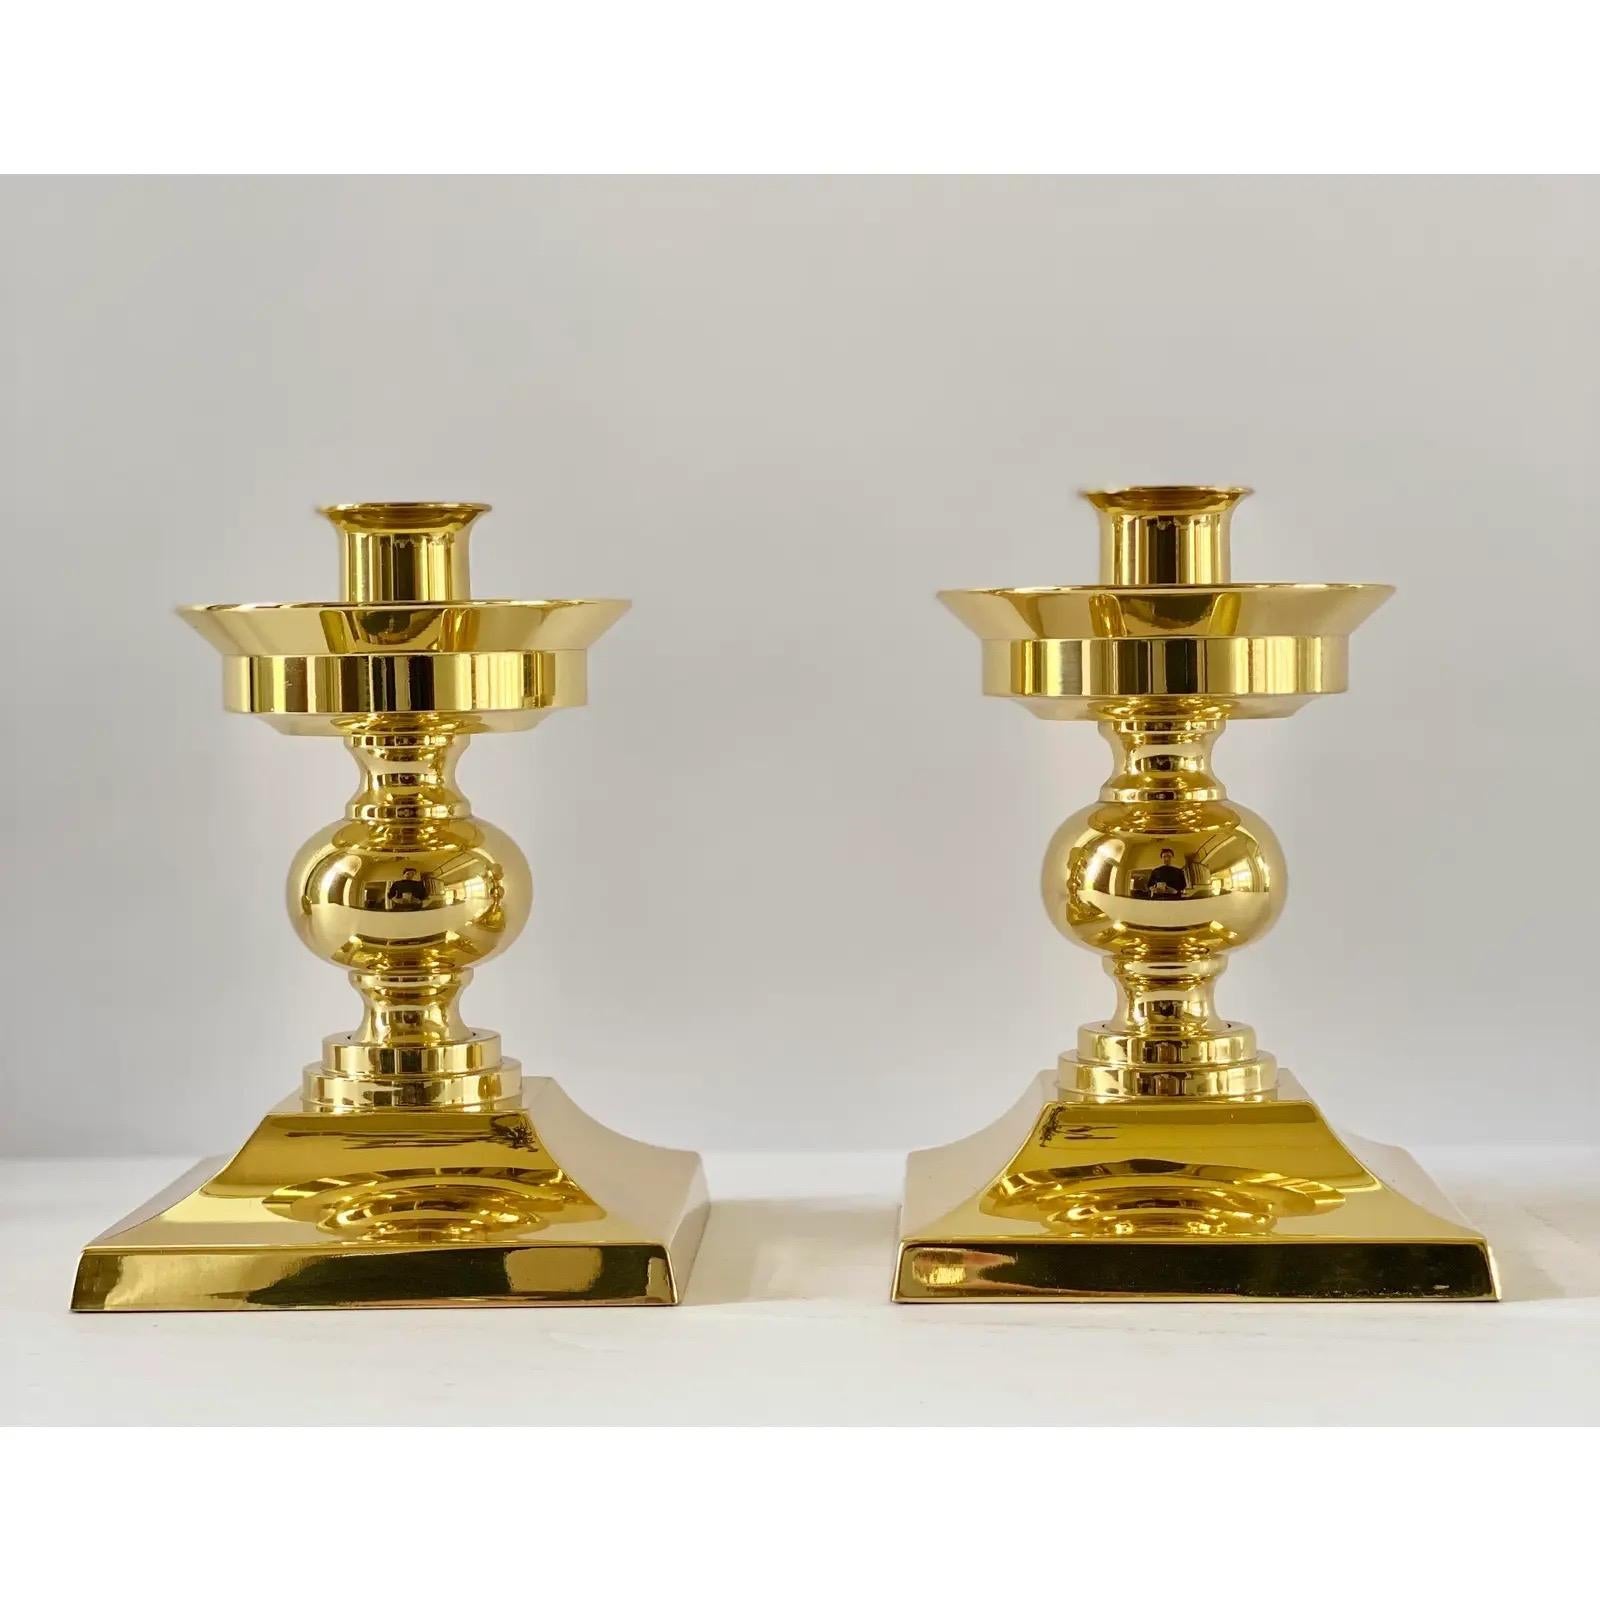 We are very pleased to offer an elegant pair of candle holders by Waterford, circa late 20th Century. The Lismore design is one of Waterford’s oldest and most unique designs. This stunning pair showcases a brass square base with a crystal hurricane